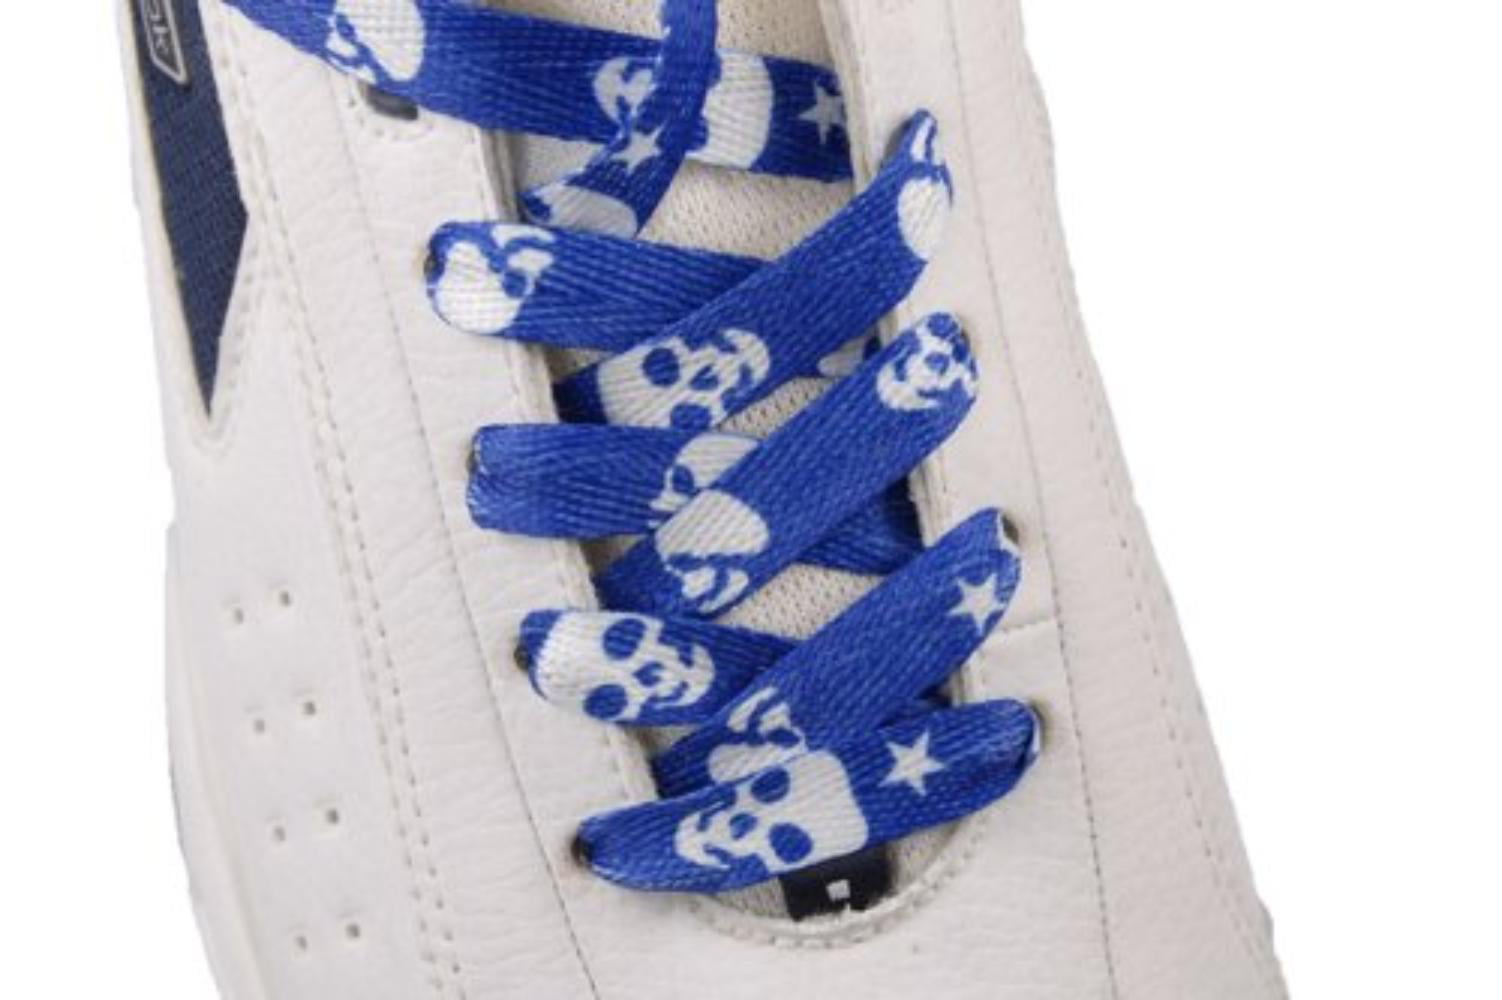 Fashion Flat Shoelaces "Skull" Sneakers Shoelace One Pair 